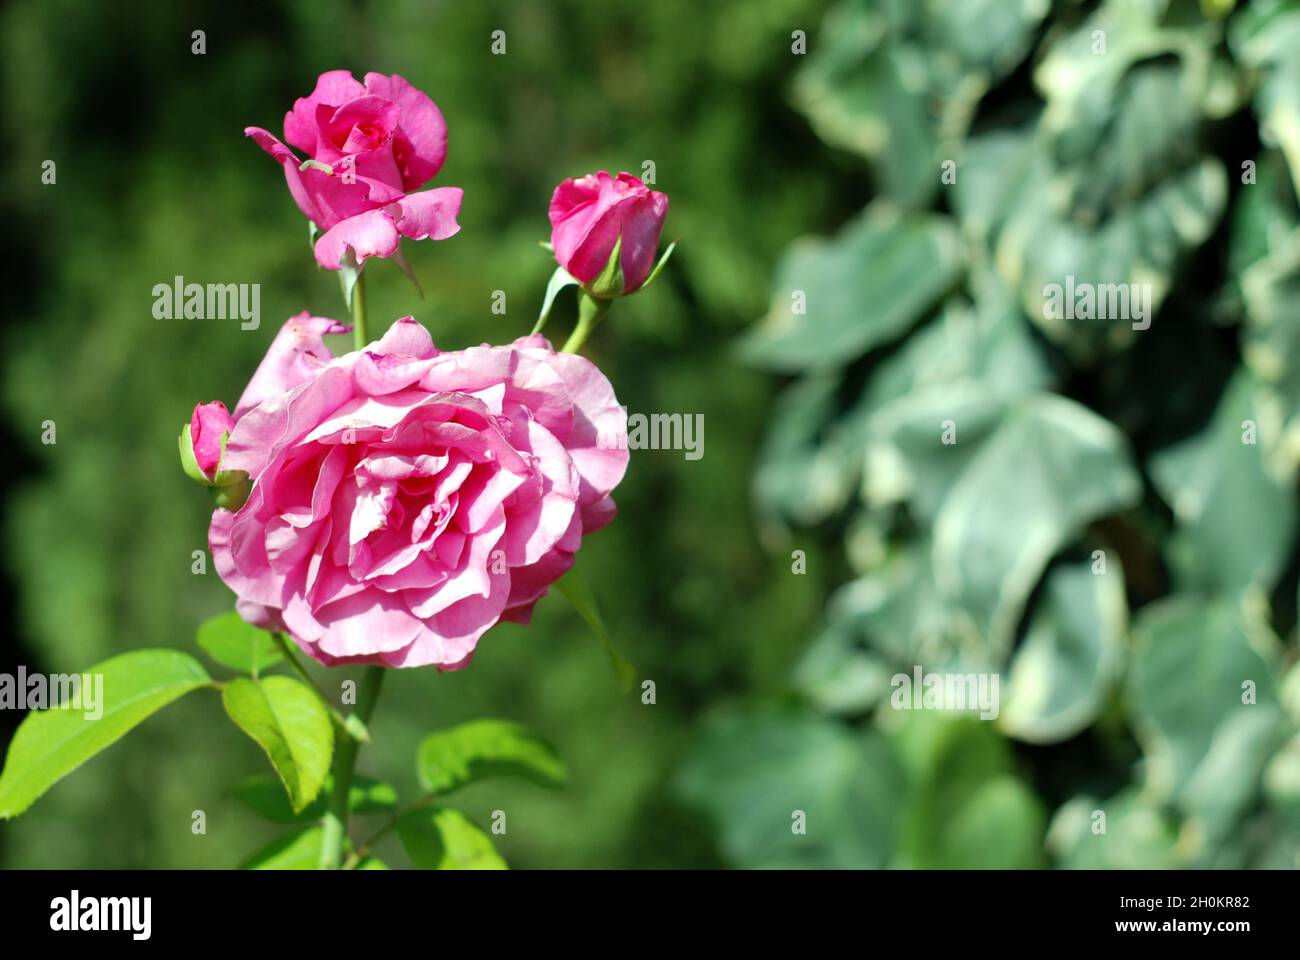 A close-up of a pink rose branch outdoors in a leafy green garden. Stock Photo